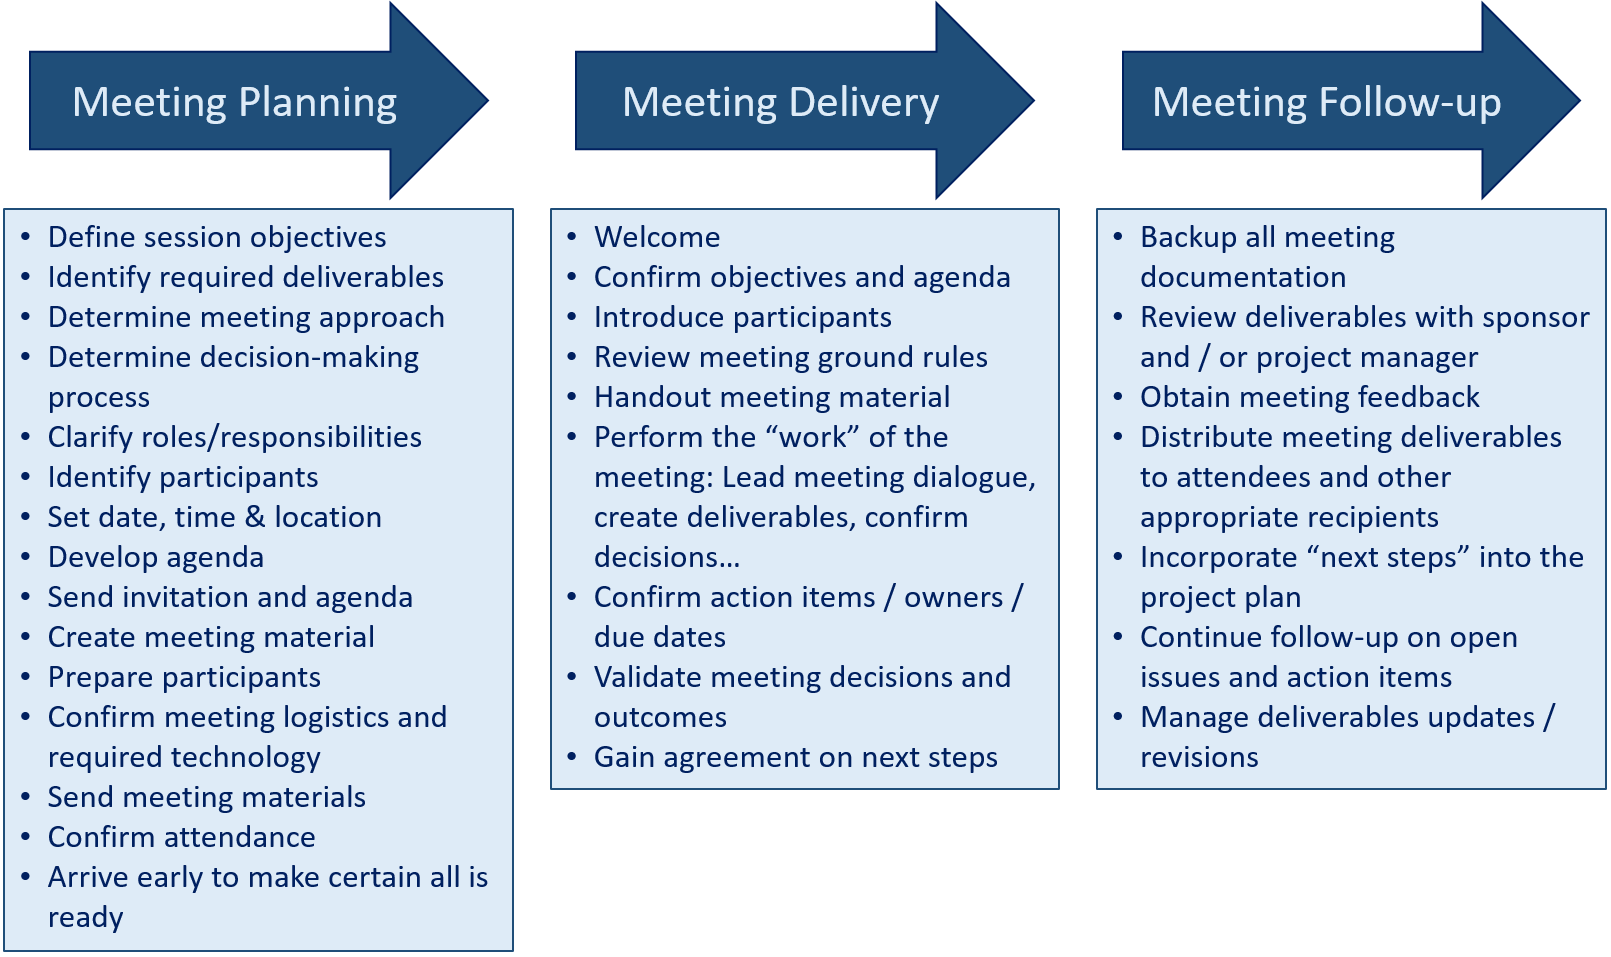 Meeting Process and Key Facilitator Responsibilities - Adapted from [4]